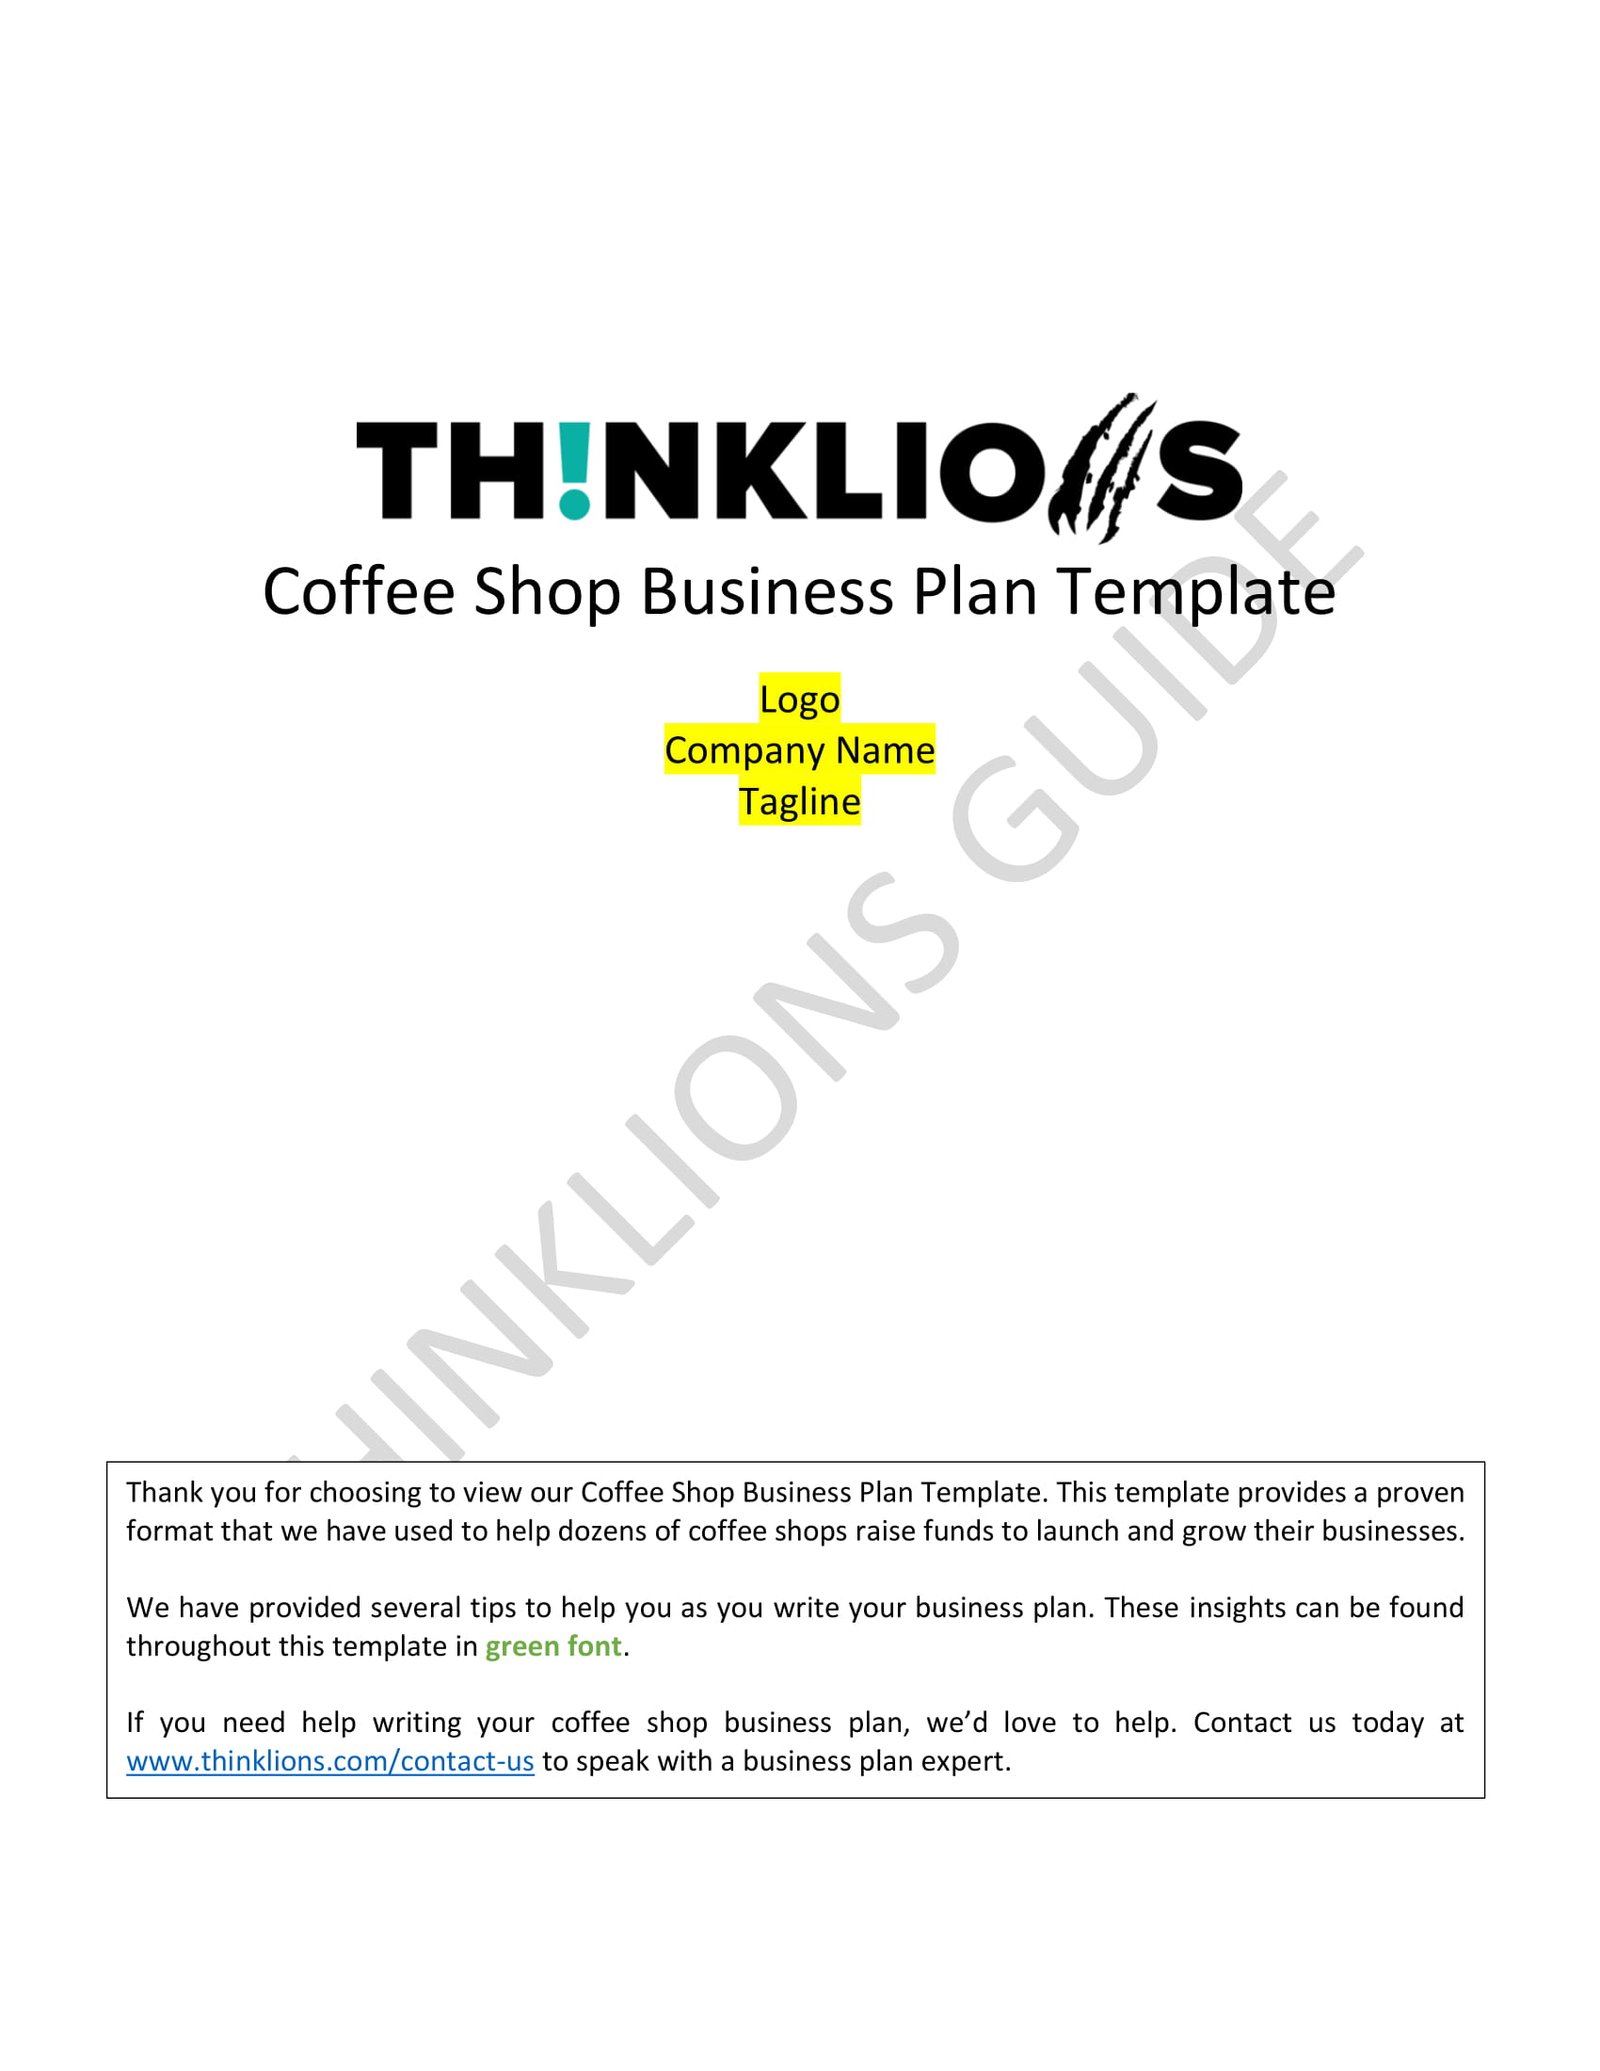 coffee shop business plan pricing strategy